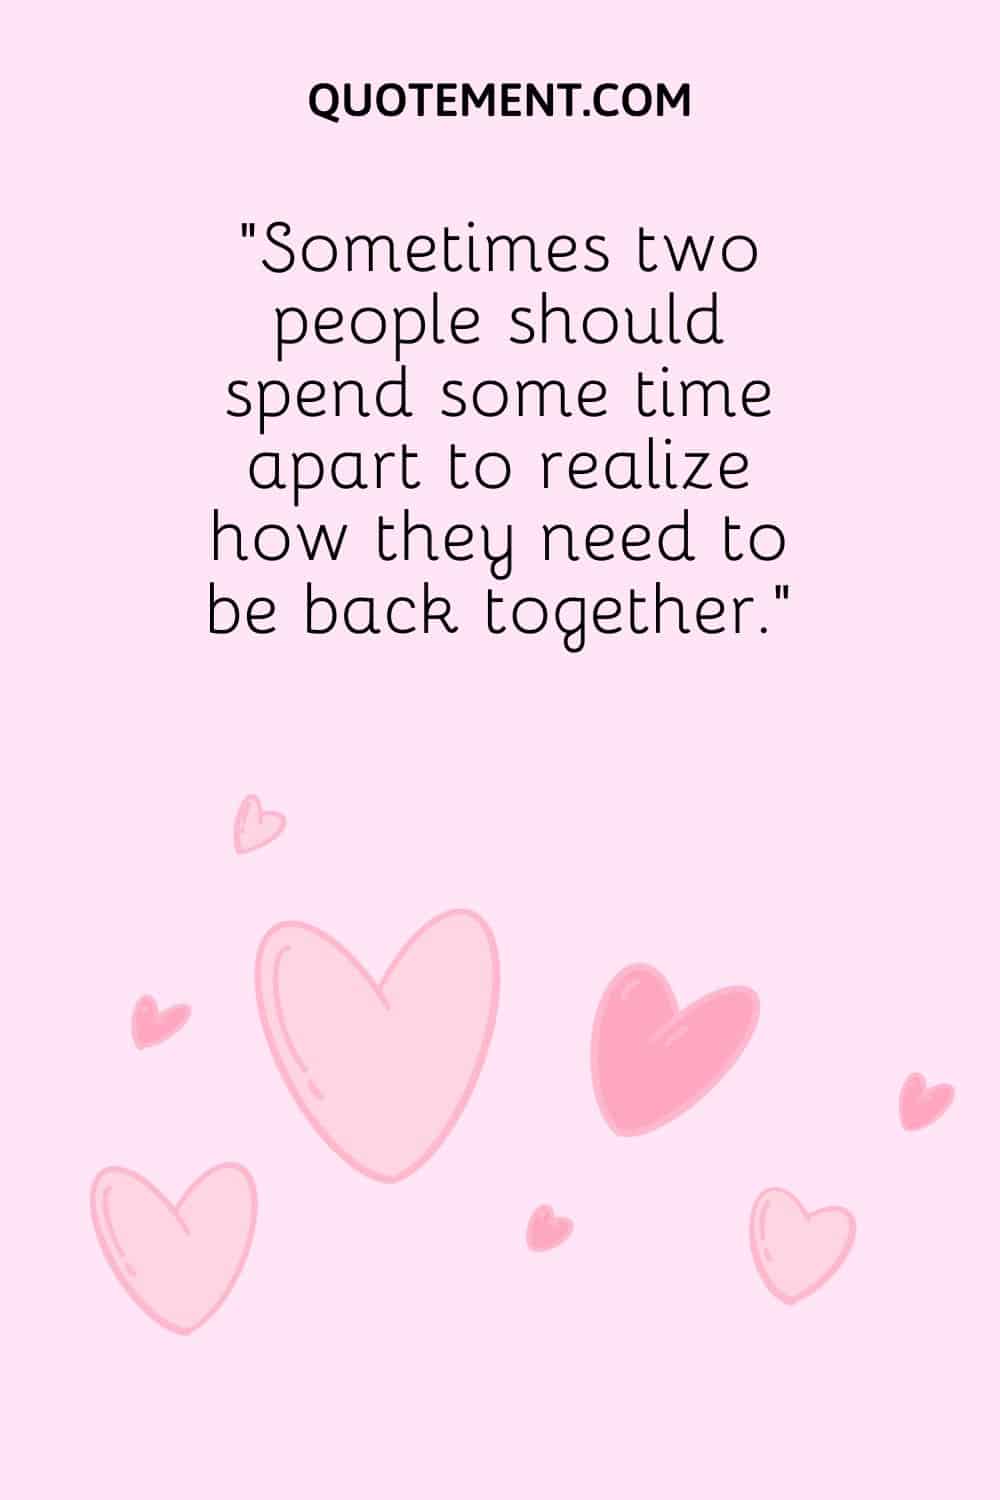 “Sometimes two people should spend some time apart to realize how they need to be back together.”